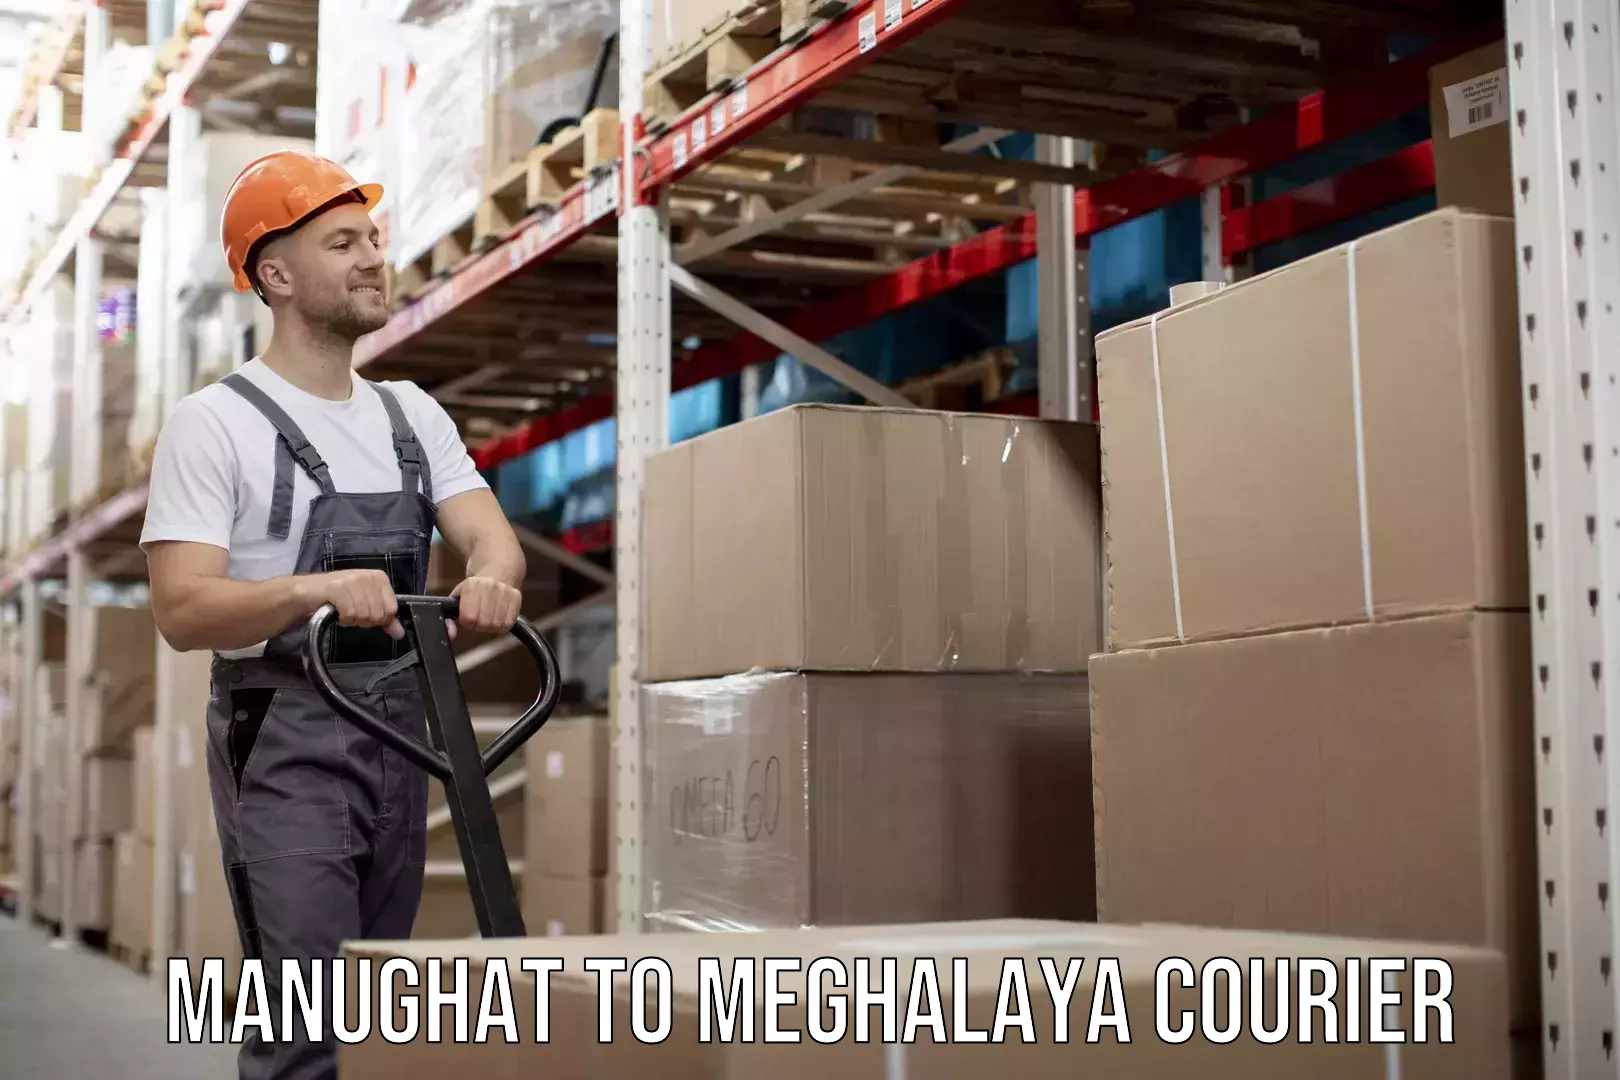 Next-day delivery options Manughat to Meghalaya